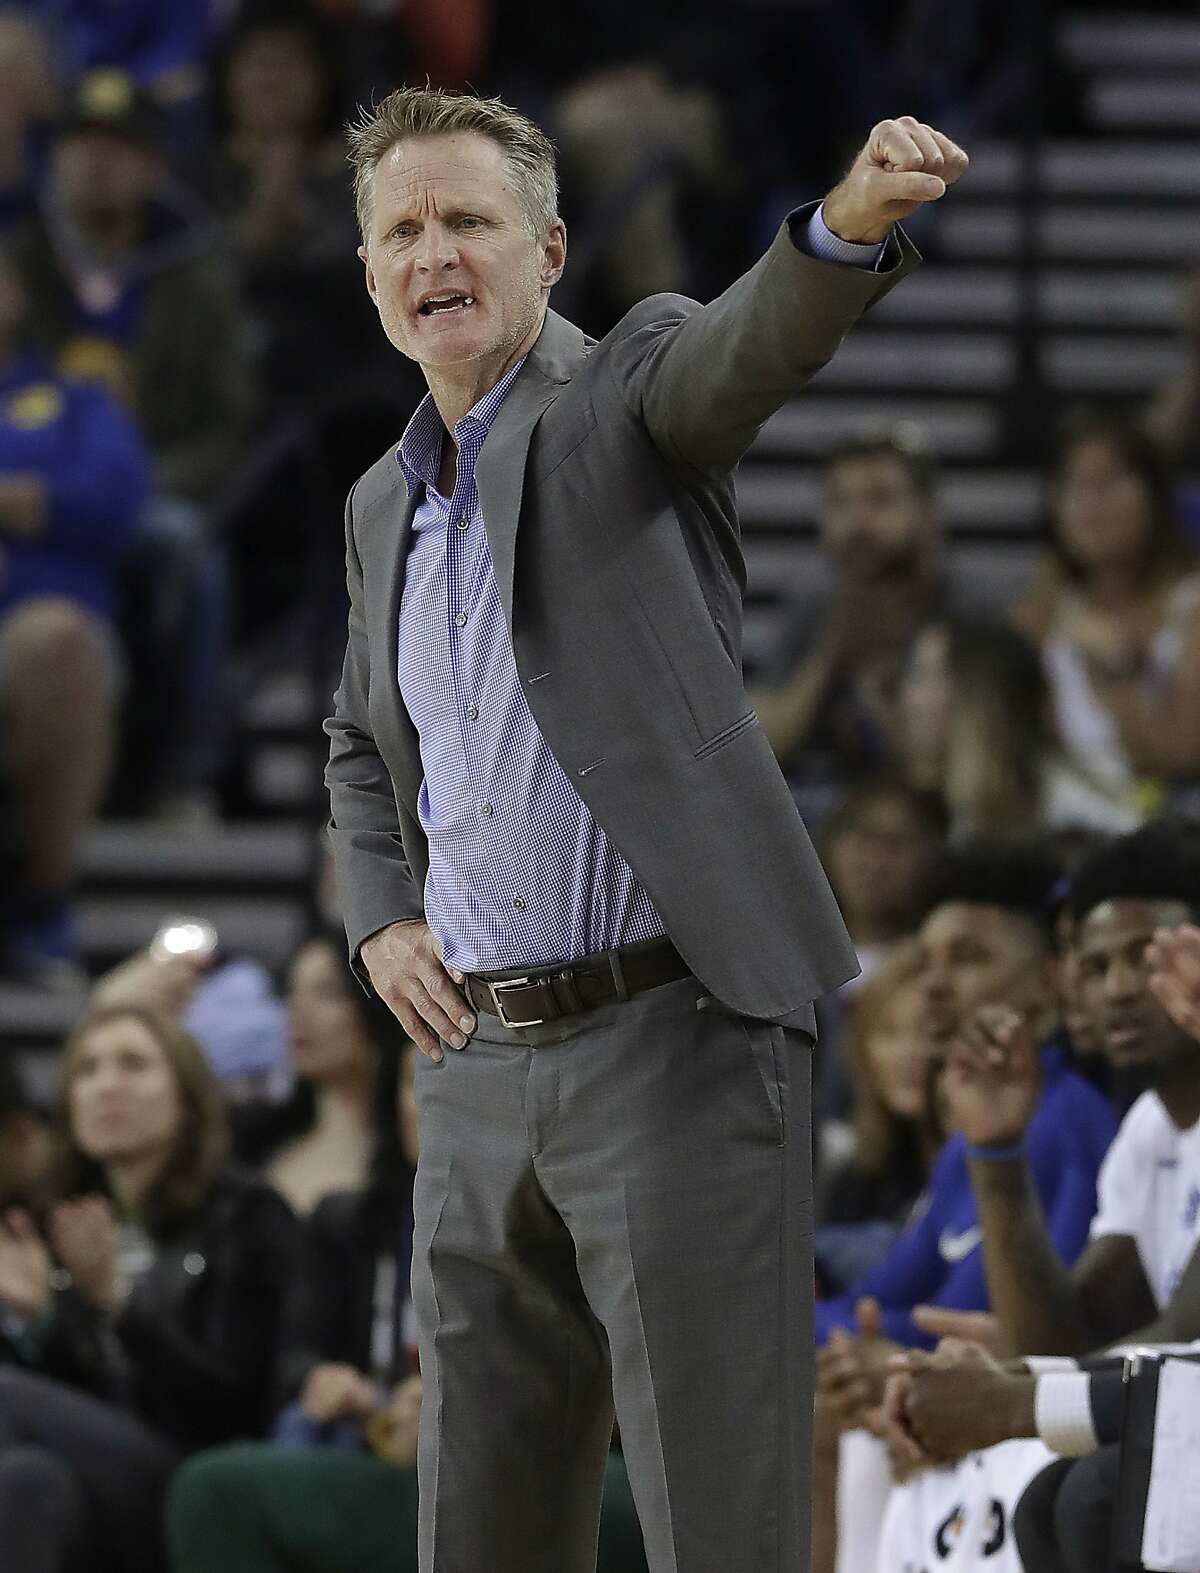 Golden State Warriors coach Steve Kerr gestures during the first half of his team's NBA basketball game against the Atlanta Hawks in Oakland, Calif., Friday, March 23, 2018. (AP Photo/Jeff Chiu)